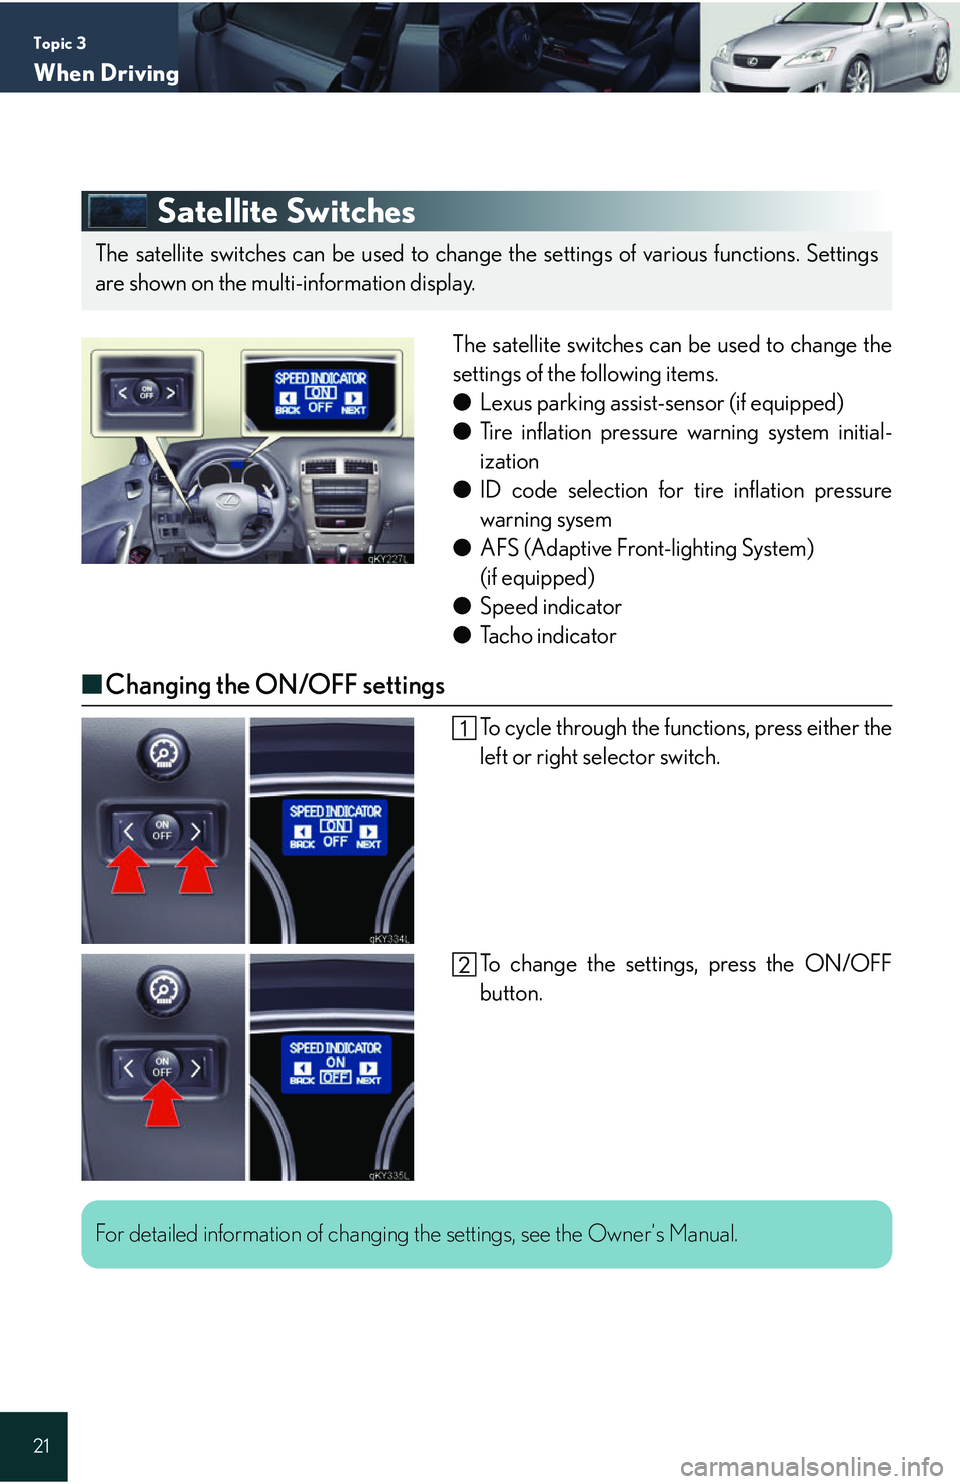 Lexus IS250 2006  Audio/video System / LEXUS 2006 IS350/250 QUICK REFERENCE GUIDE Topic 3
When Driving
21
Satellite Switches
The satellite switches can be used to change the
settings of the following items.
● Lexus parking assist-sensor (if equipped)
● Tire inflation pressure w